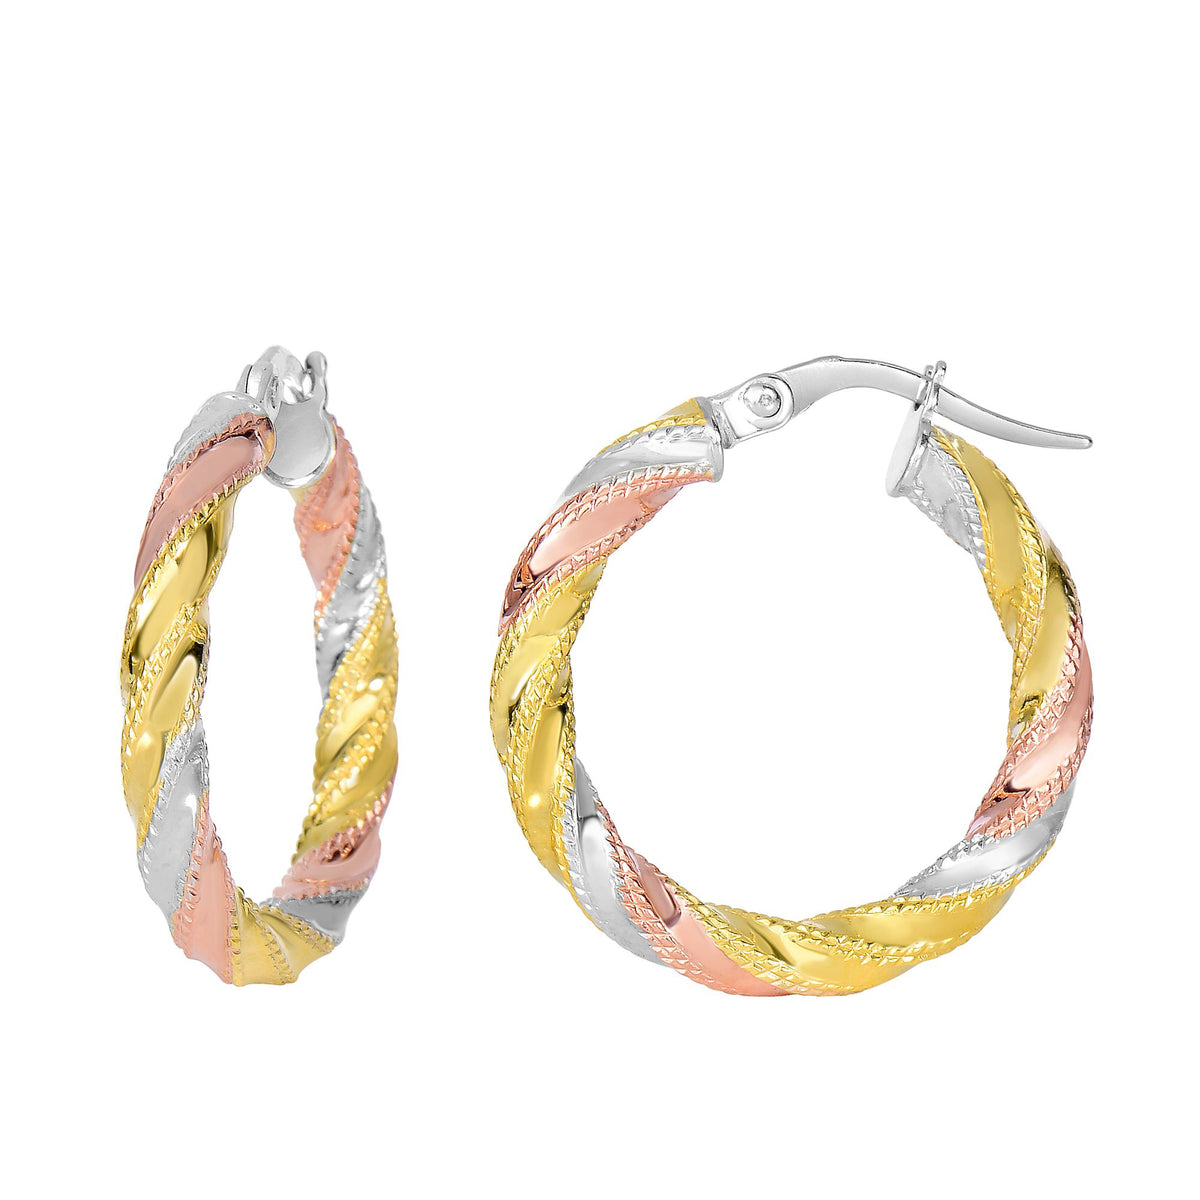 14K Yellow And White Rose Gold Twisted Round Hoop Earrings, Diameter 20mm